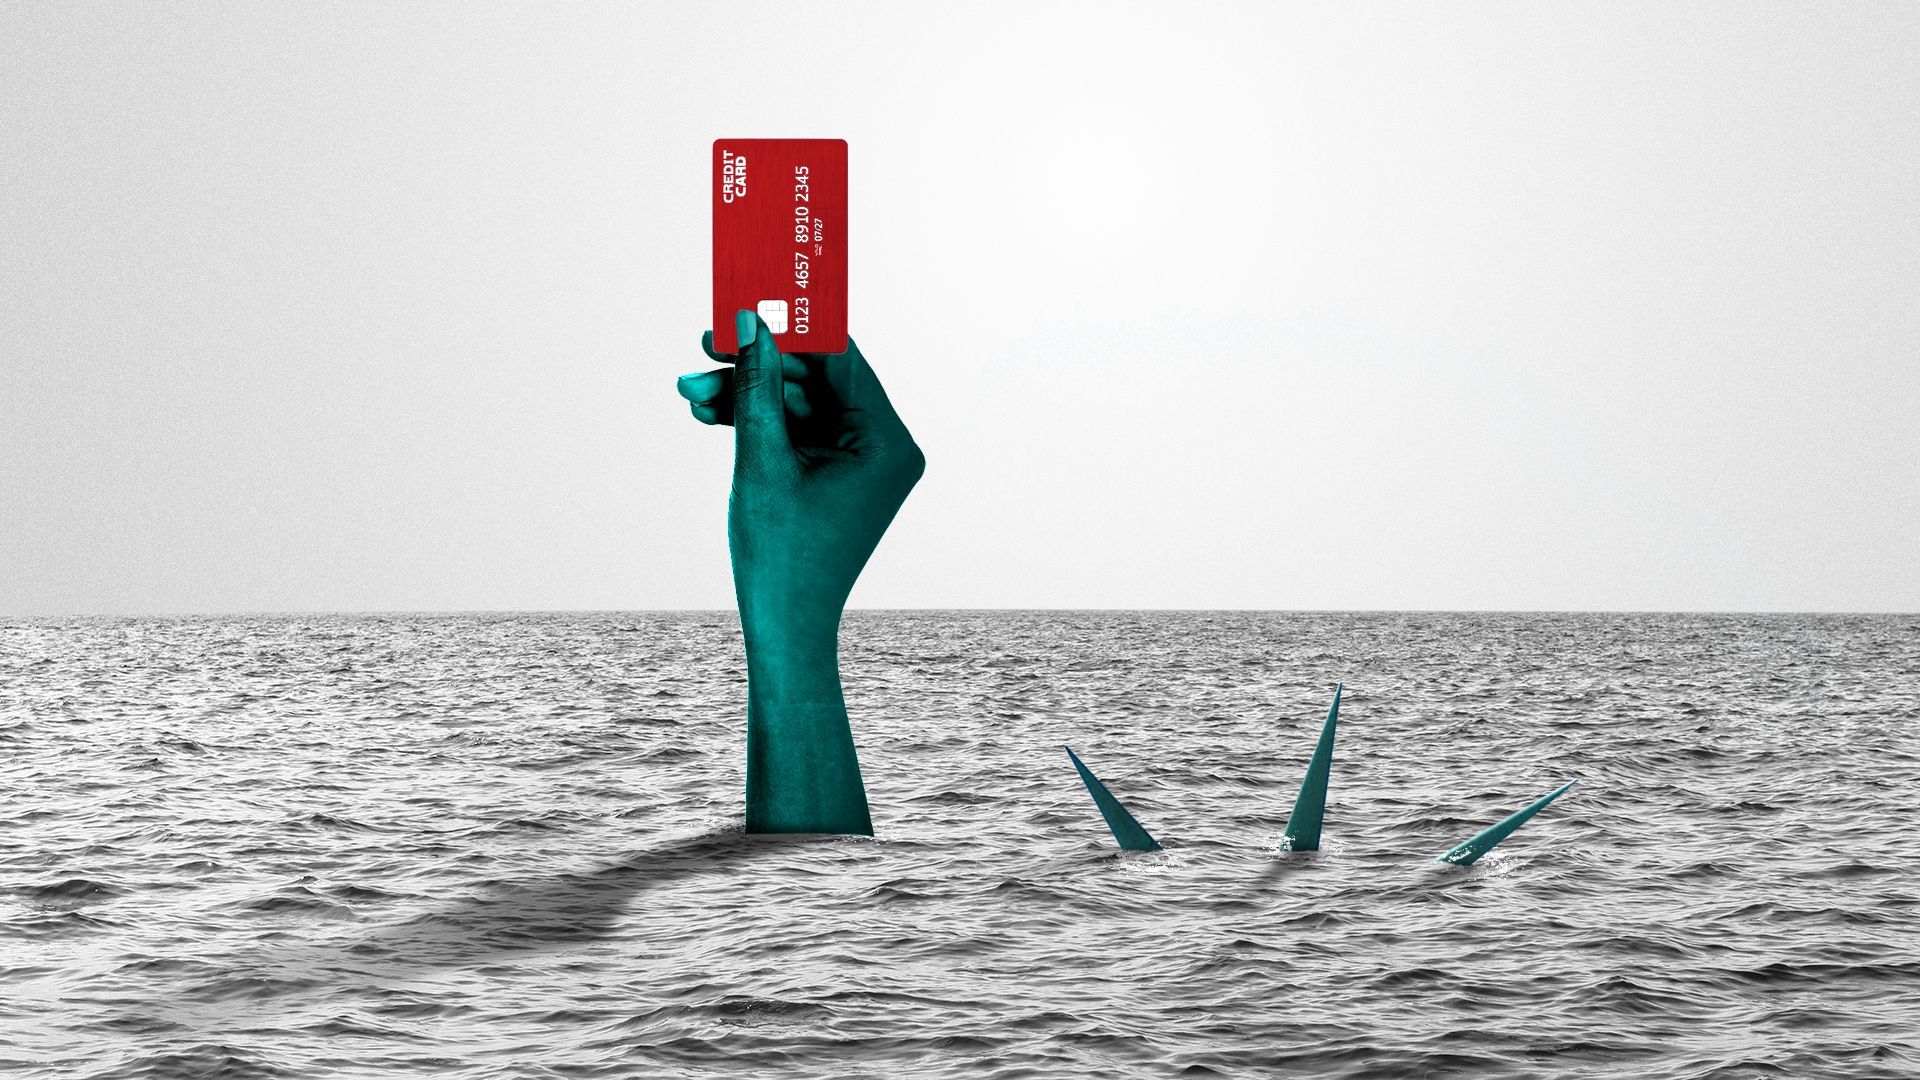 Illustration of the Statue of Liberty drowning and holding up a credit card just above water